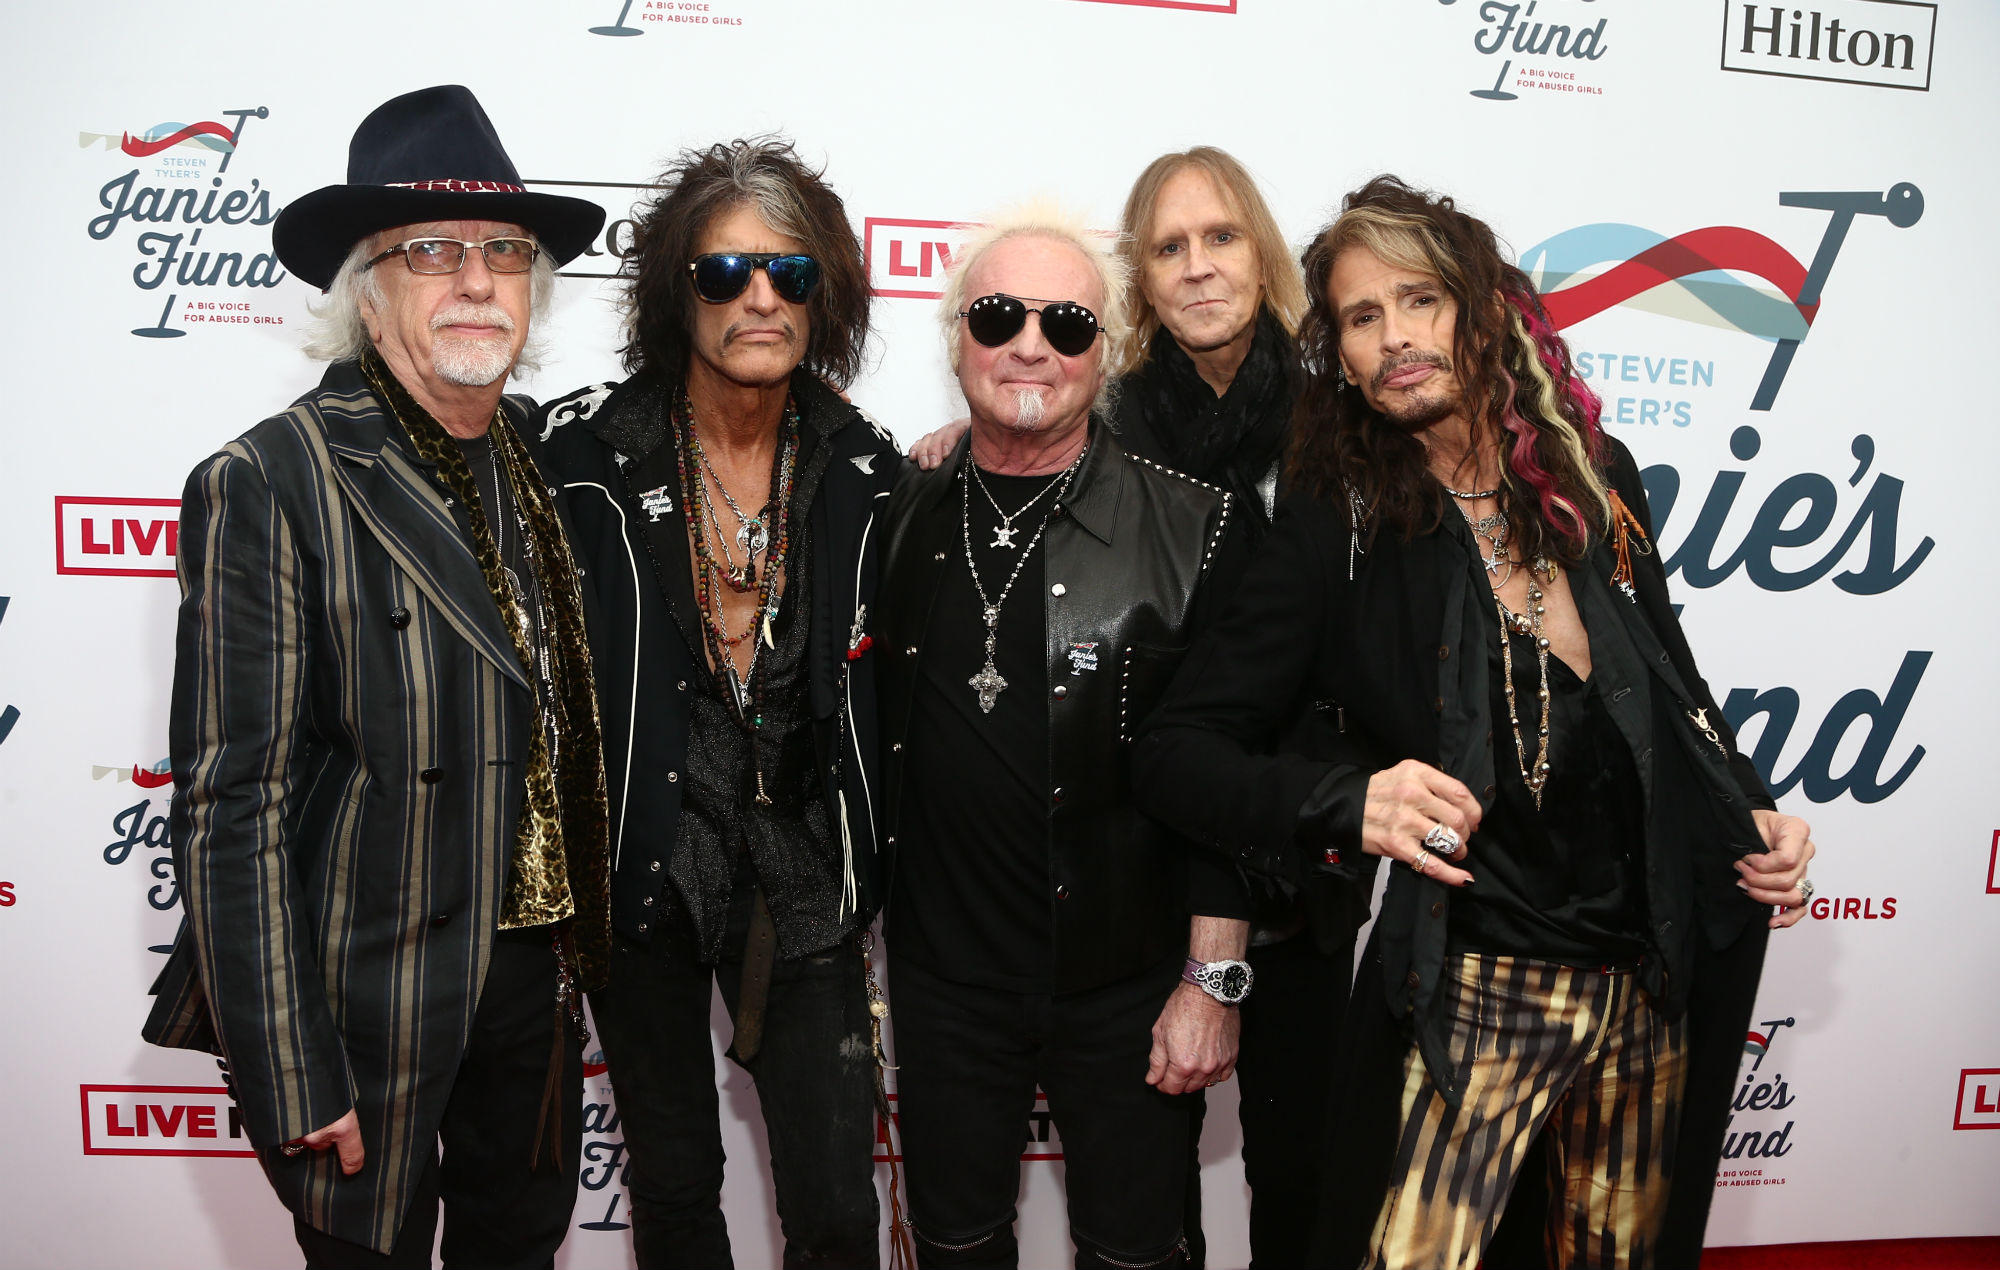 Aerosmith drummer joey kramer is suing the band following exclusion claims